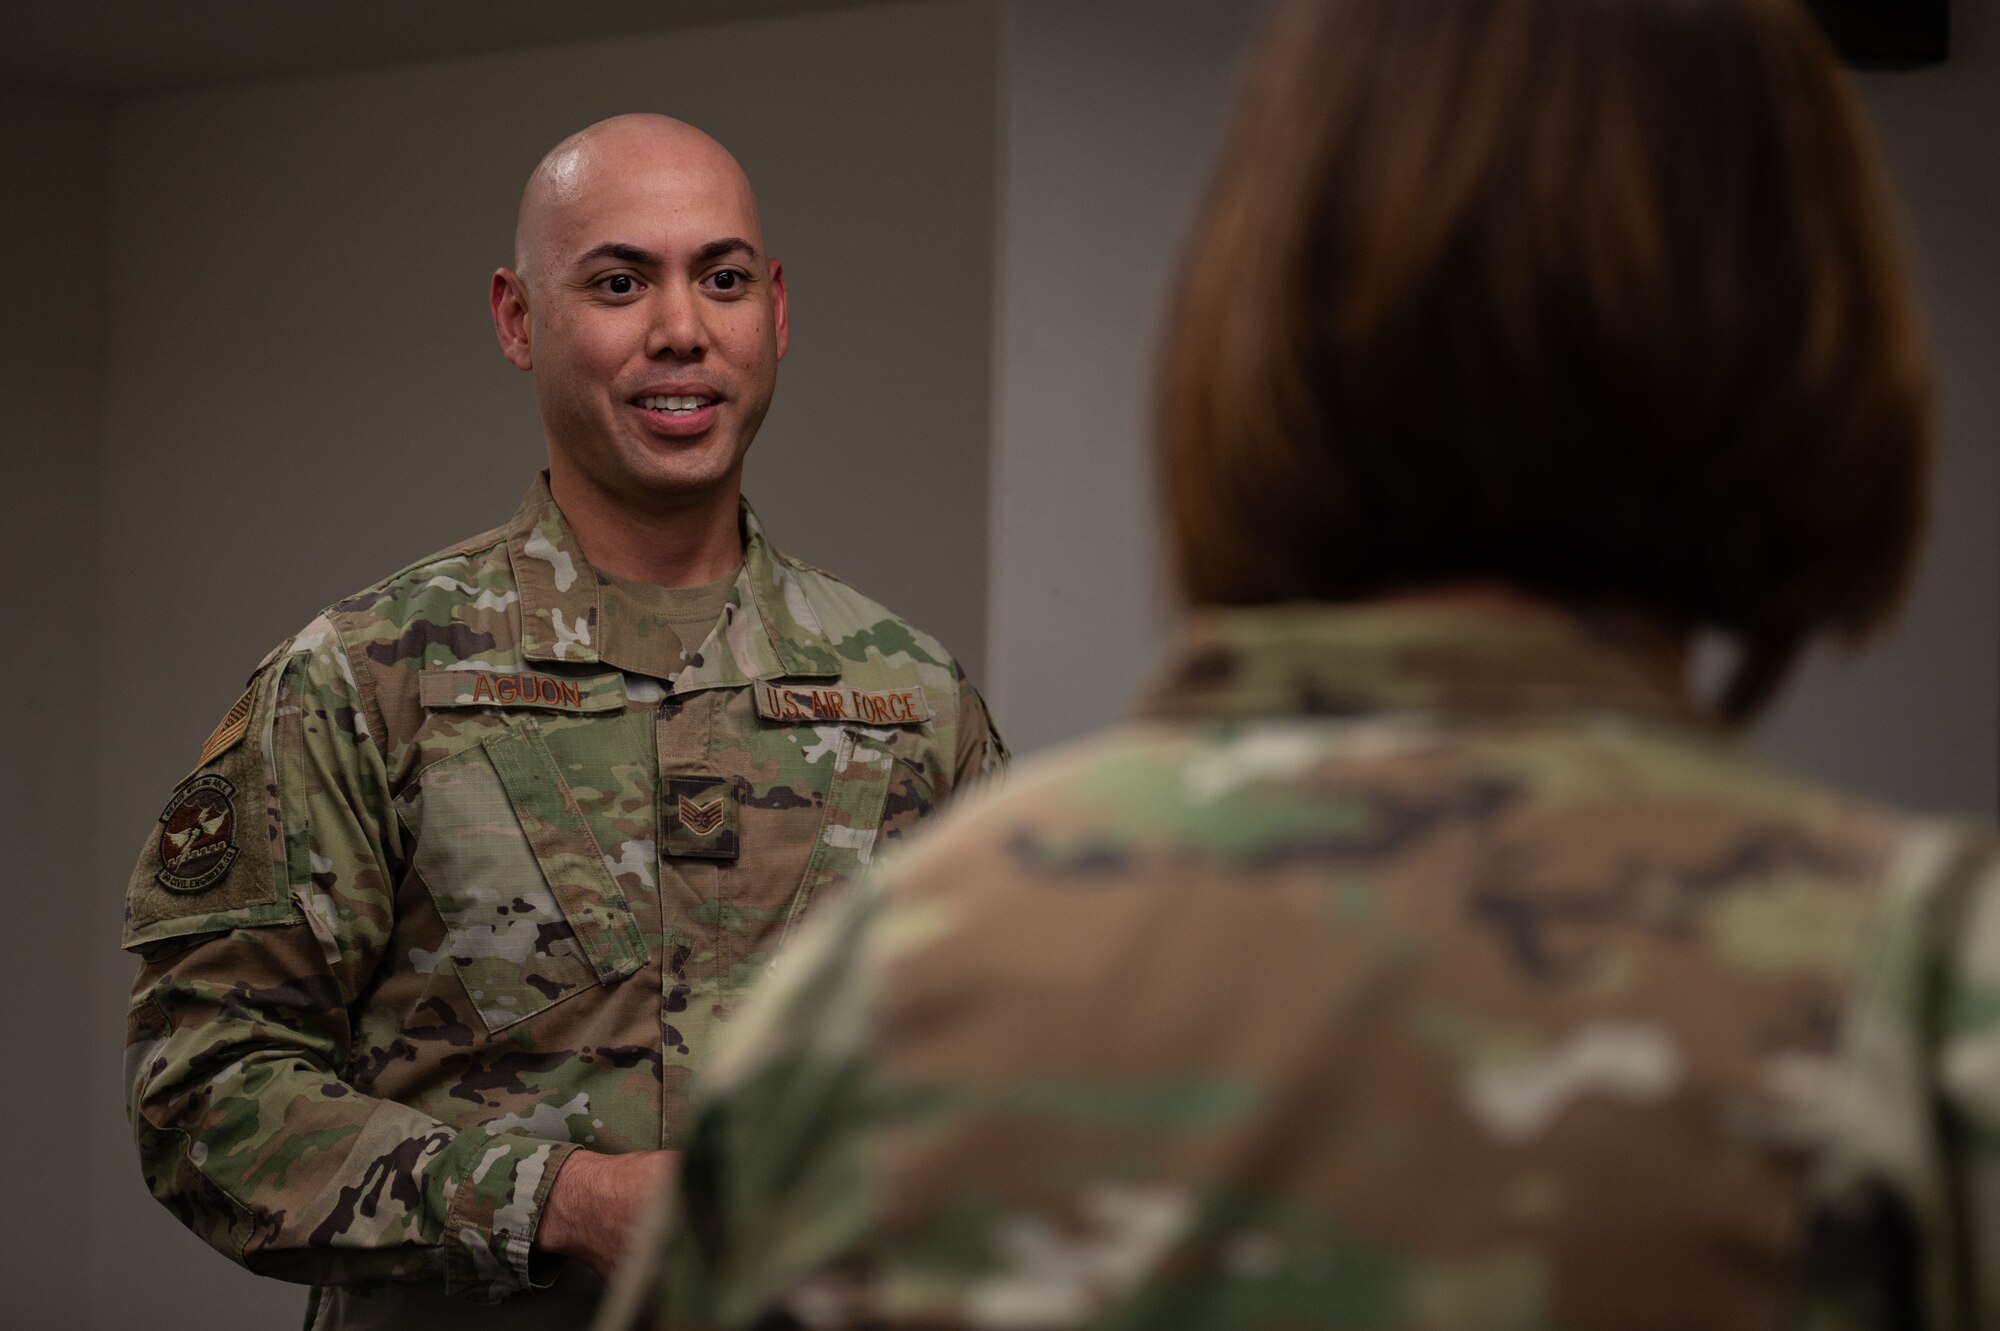 U.S. Air Force Staff Sgt. Raymond Aguon, left, 99th Civil Engineer Squadron Airmen dorm leader, briefs Chief Master Sgt. of the Air Force JoAnne S. Bass, on dorm life at Nellis Air Force Base, Nevada, May 2, 2023.